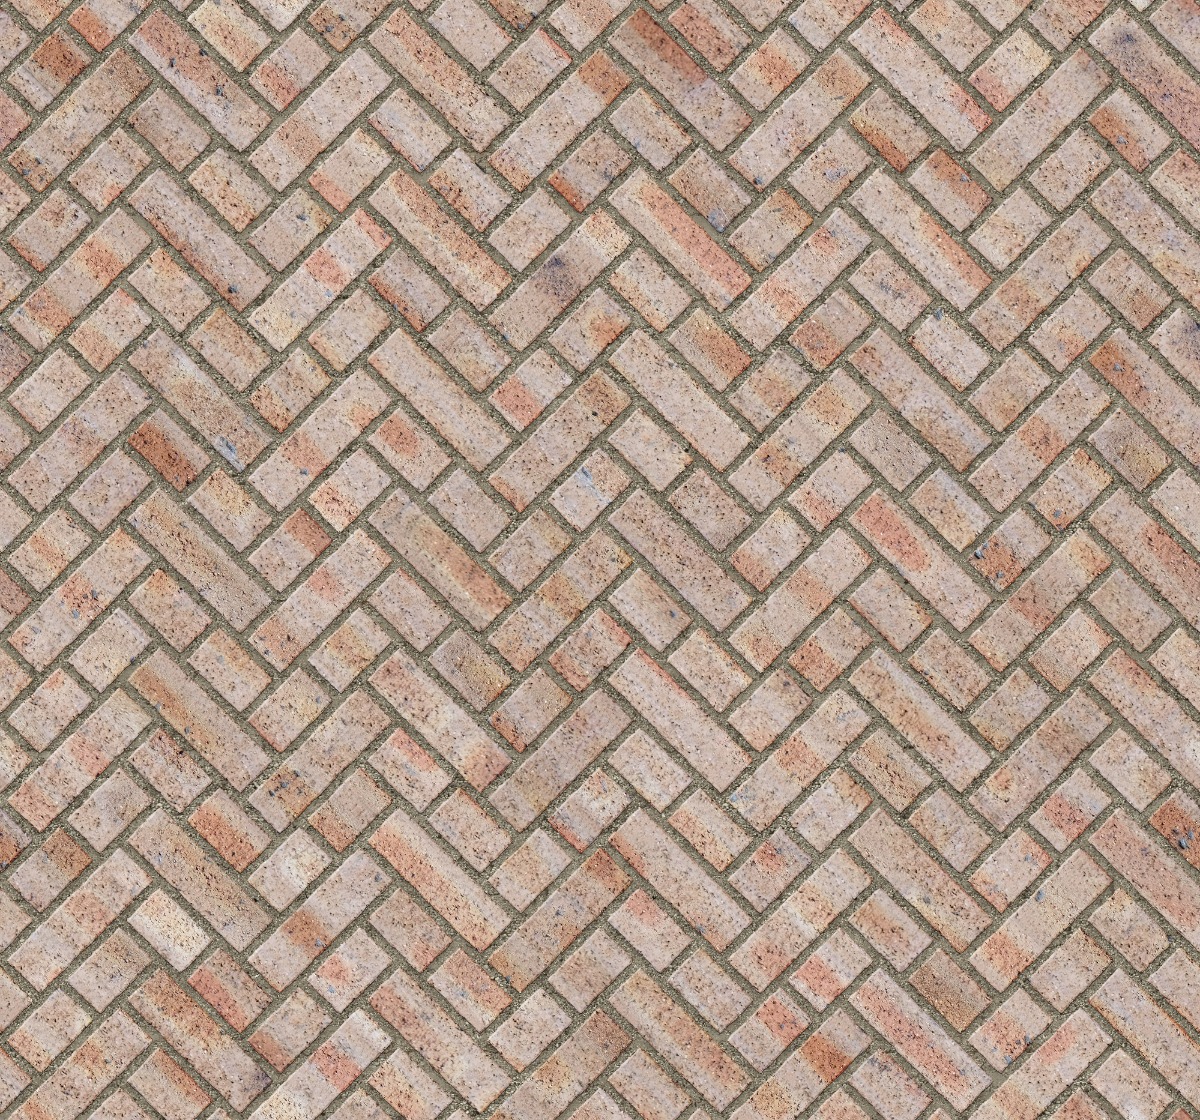 A seamless brick texture with dragfaced brick units arranged in a Broken Herringbone pattern